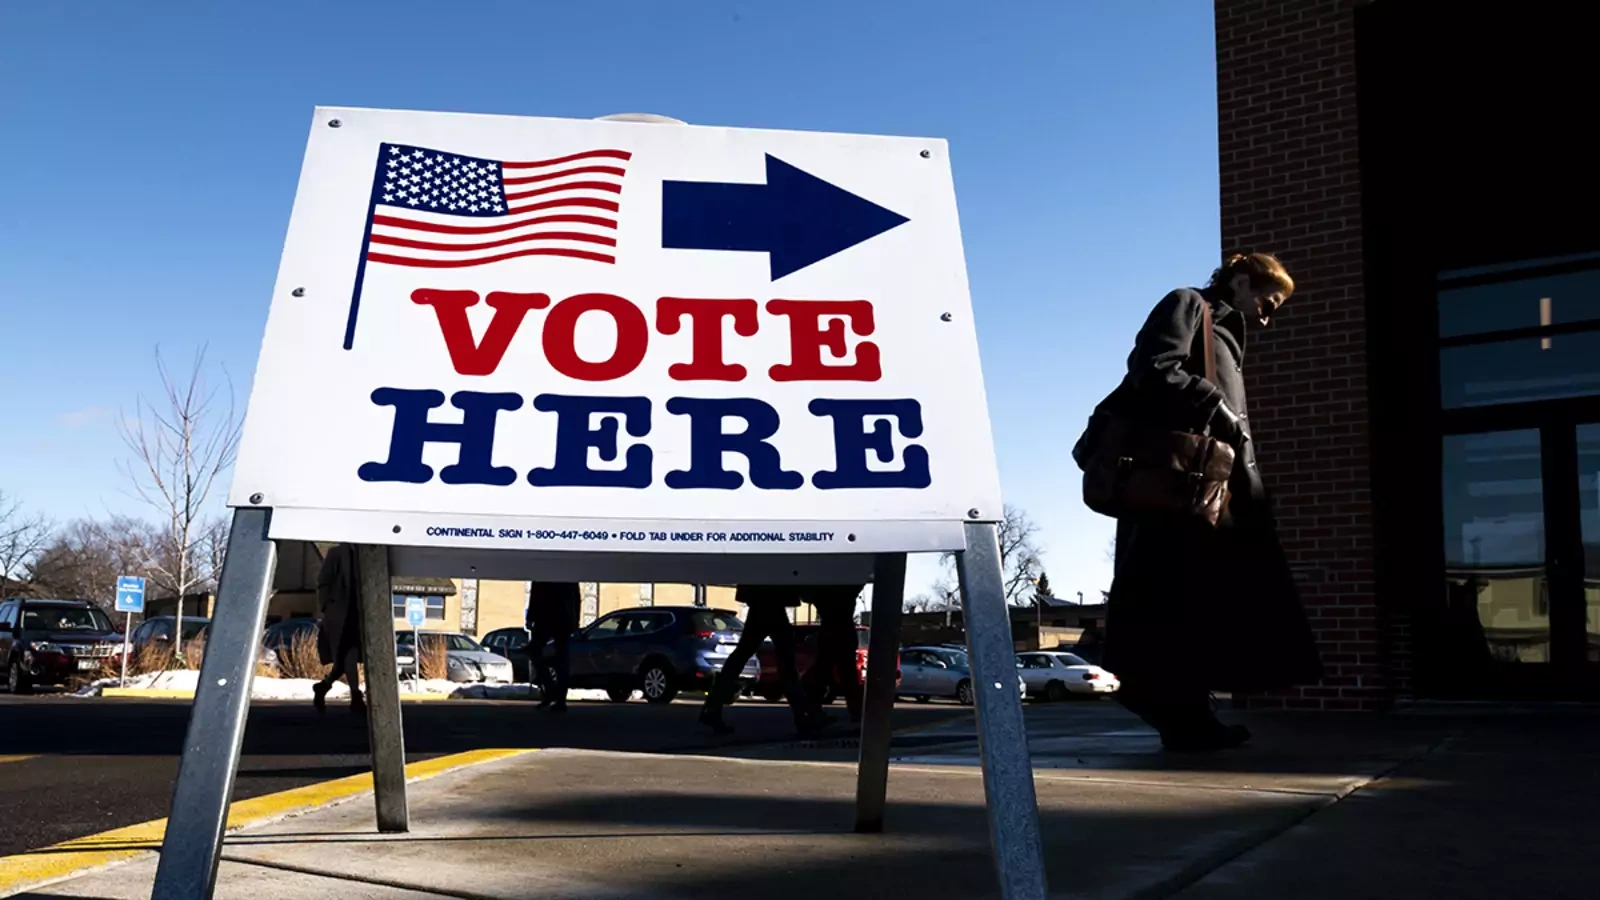 A voter arrives at a polling place on March 3, 2020 in Minneapolis, Minnesota.